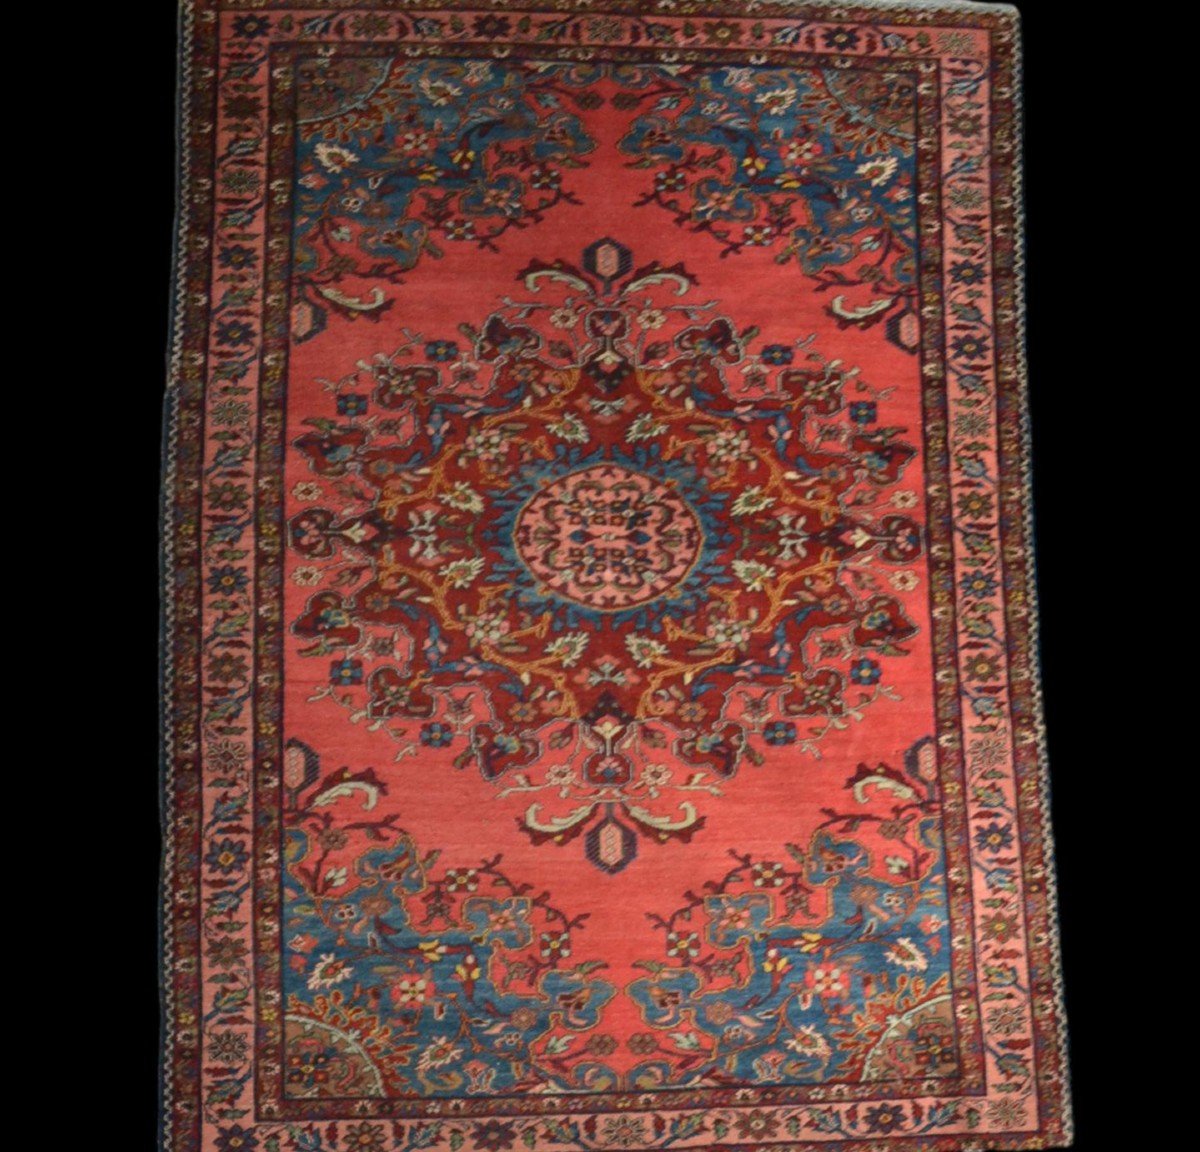 Old Persian Tafresh Rug, 135 X 194 Cm, Hand-knotted Wool In Iran At The Beginning Of The 20th Century-photo-7